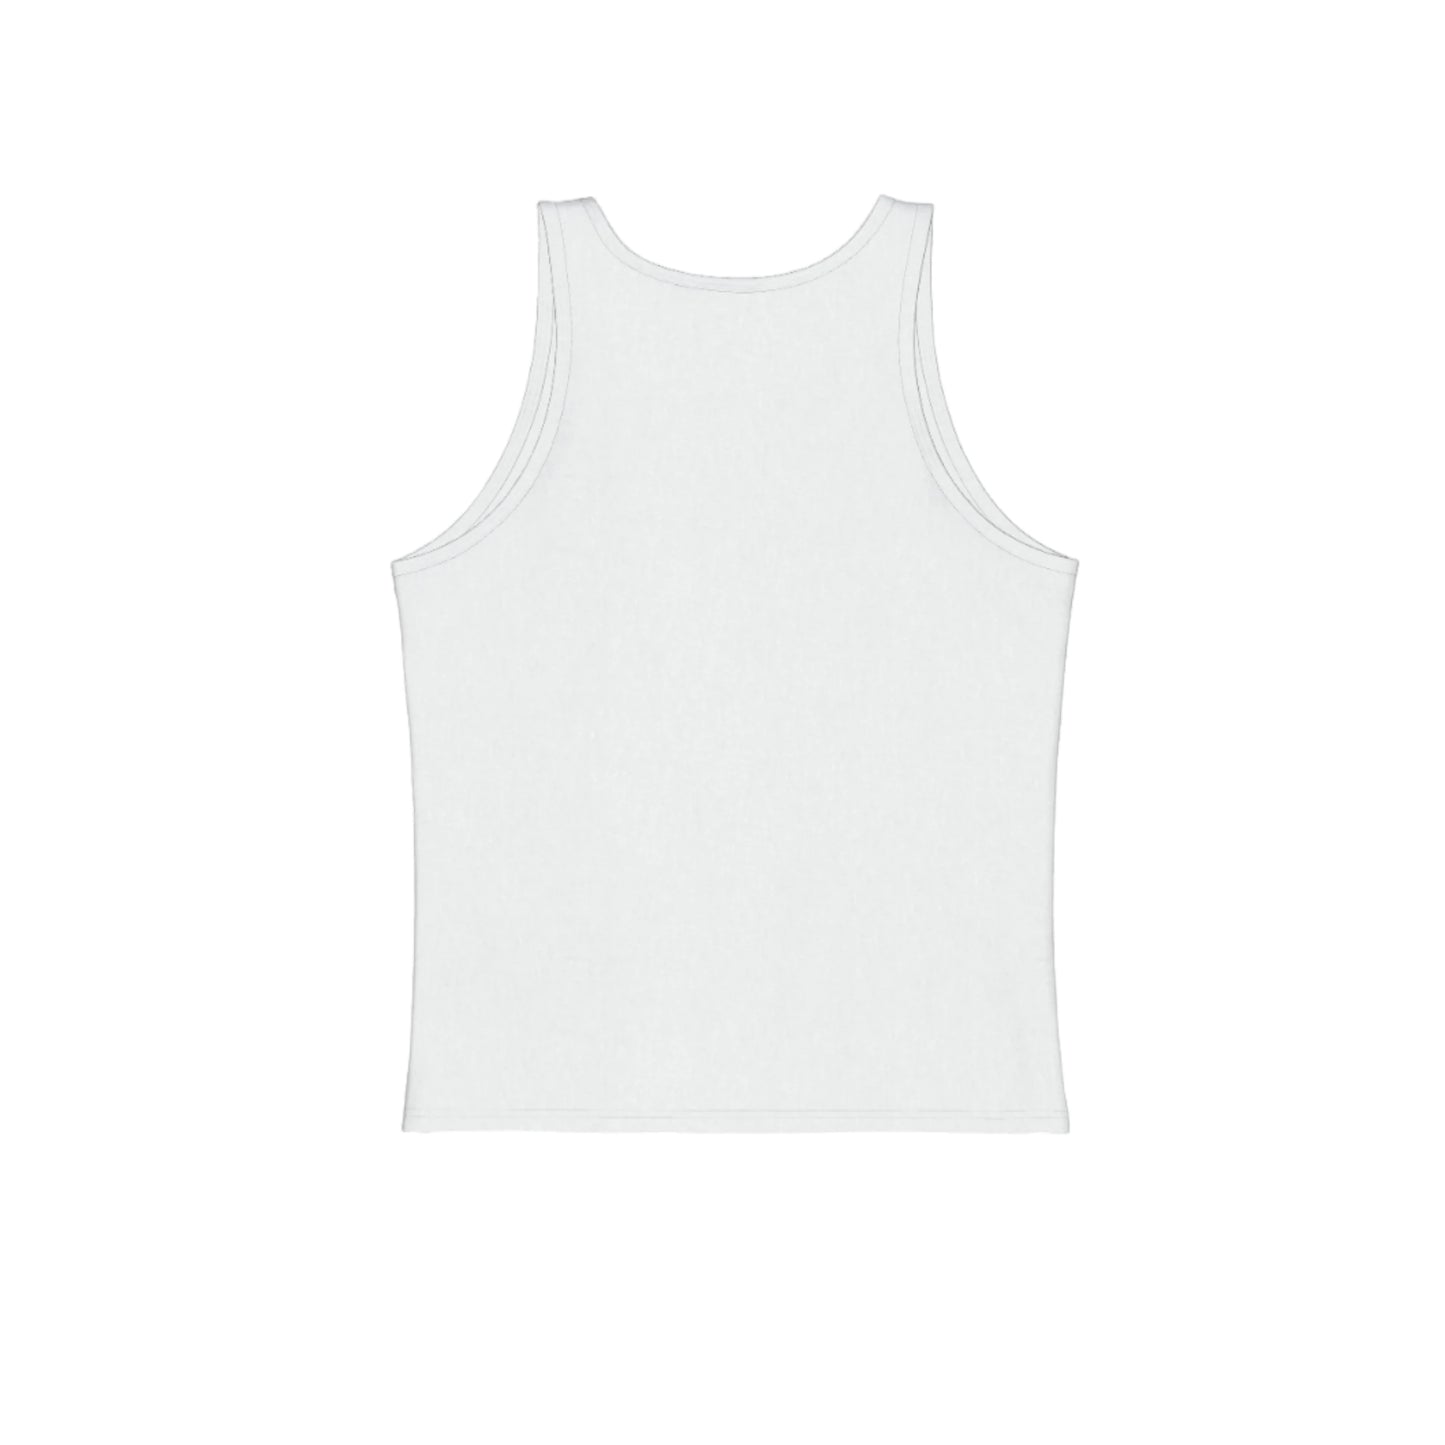 The back of the white unisex tank top.